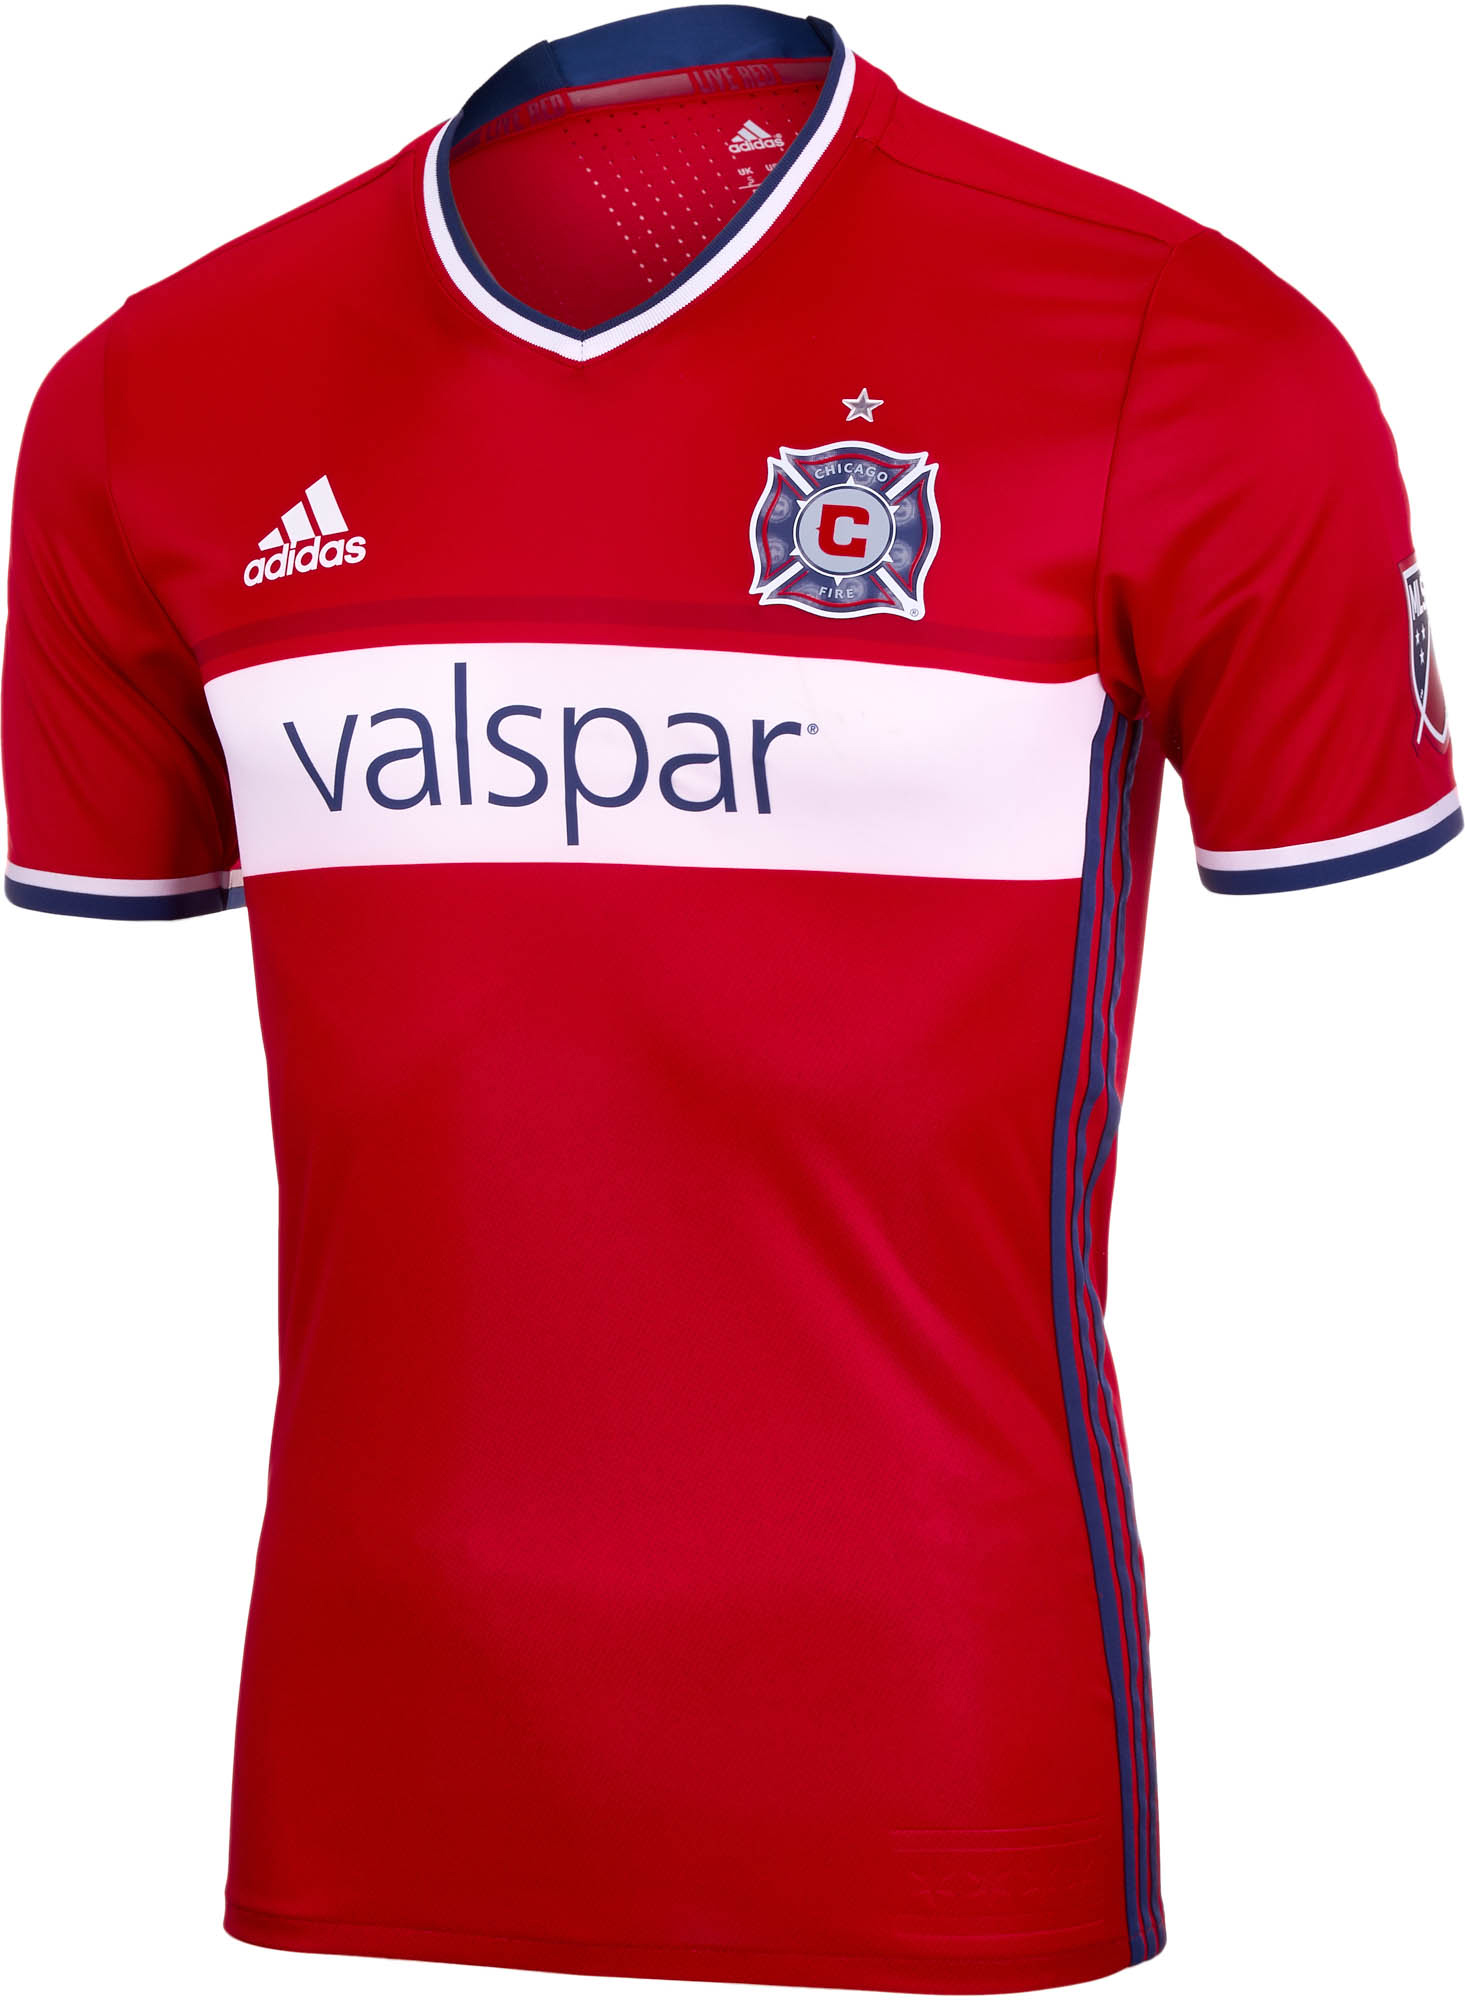 adidas Chicago Fire Home Jersey 2016 Chicago Soccer Jerseys